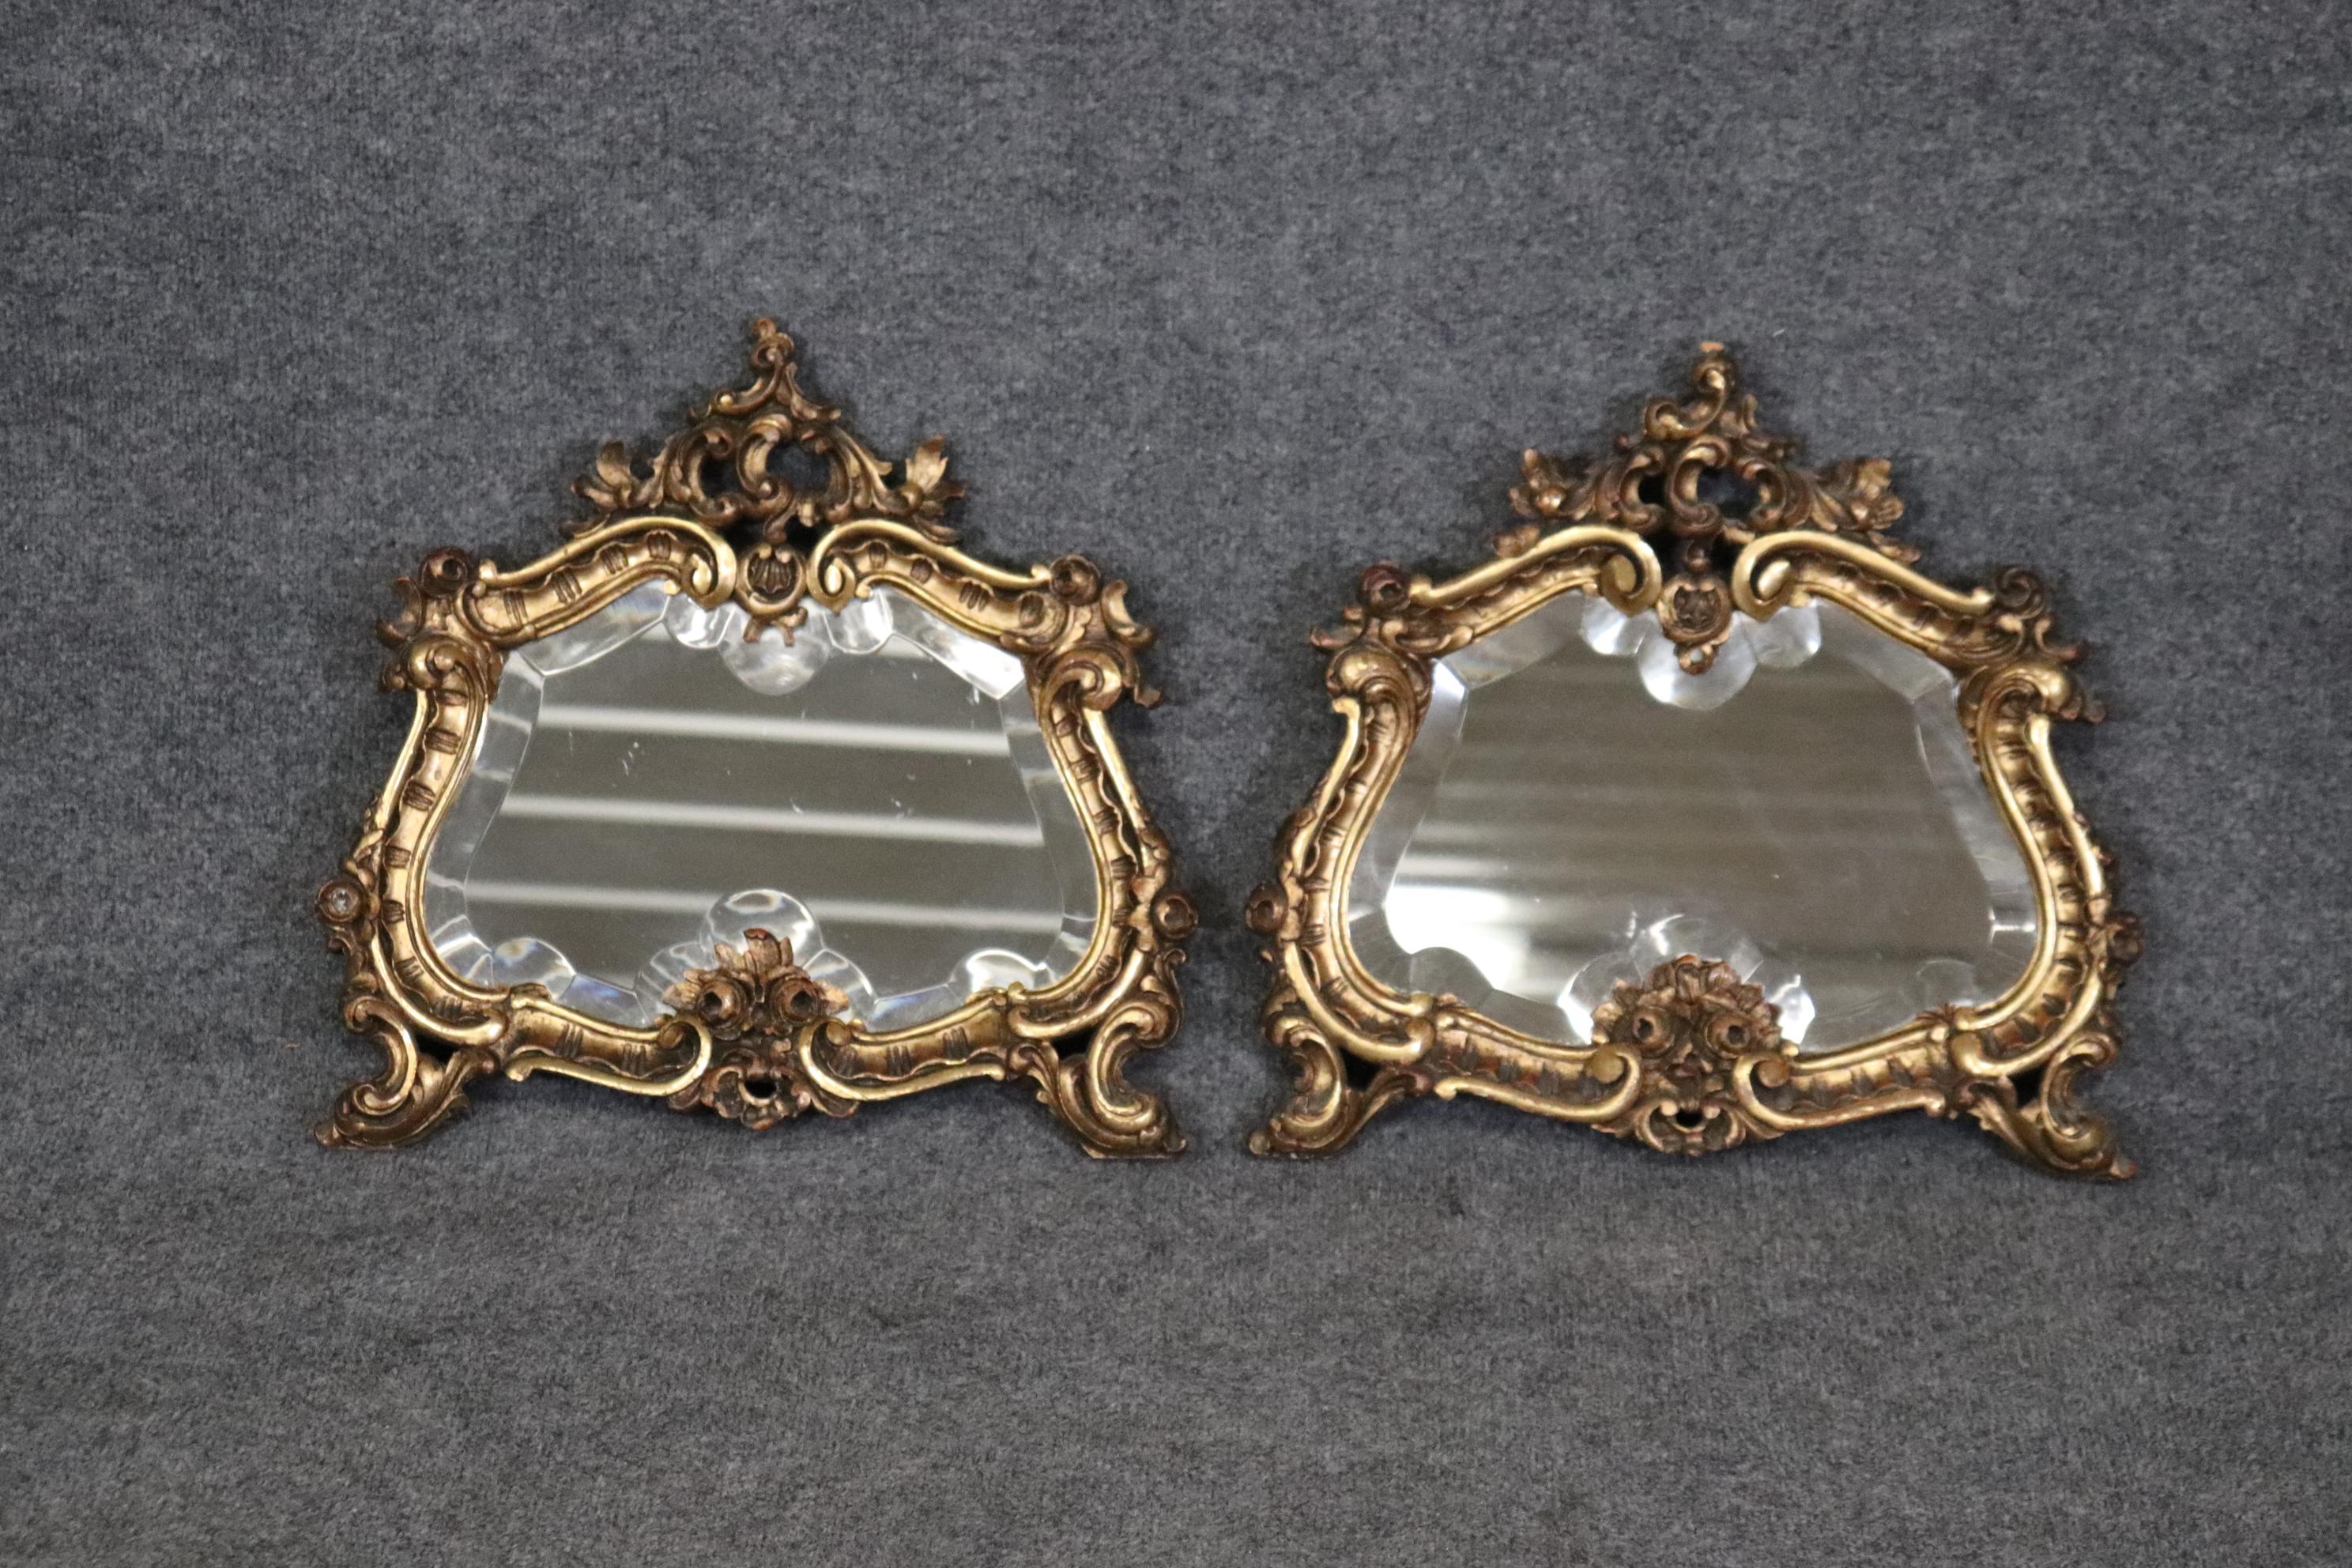 This is a gorgeous pair of small beveled glass gilded wooden Rococo mirror. The pair of mirrors is in good condition with minor signs of age and use such as age cracks or small repairs. They measure 18 inches wide x 17.25 tall x 2.25 and date to the